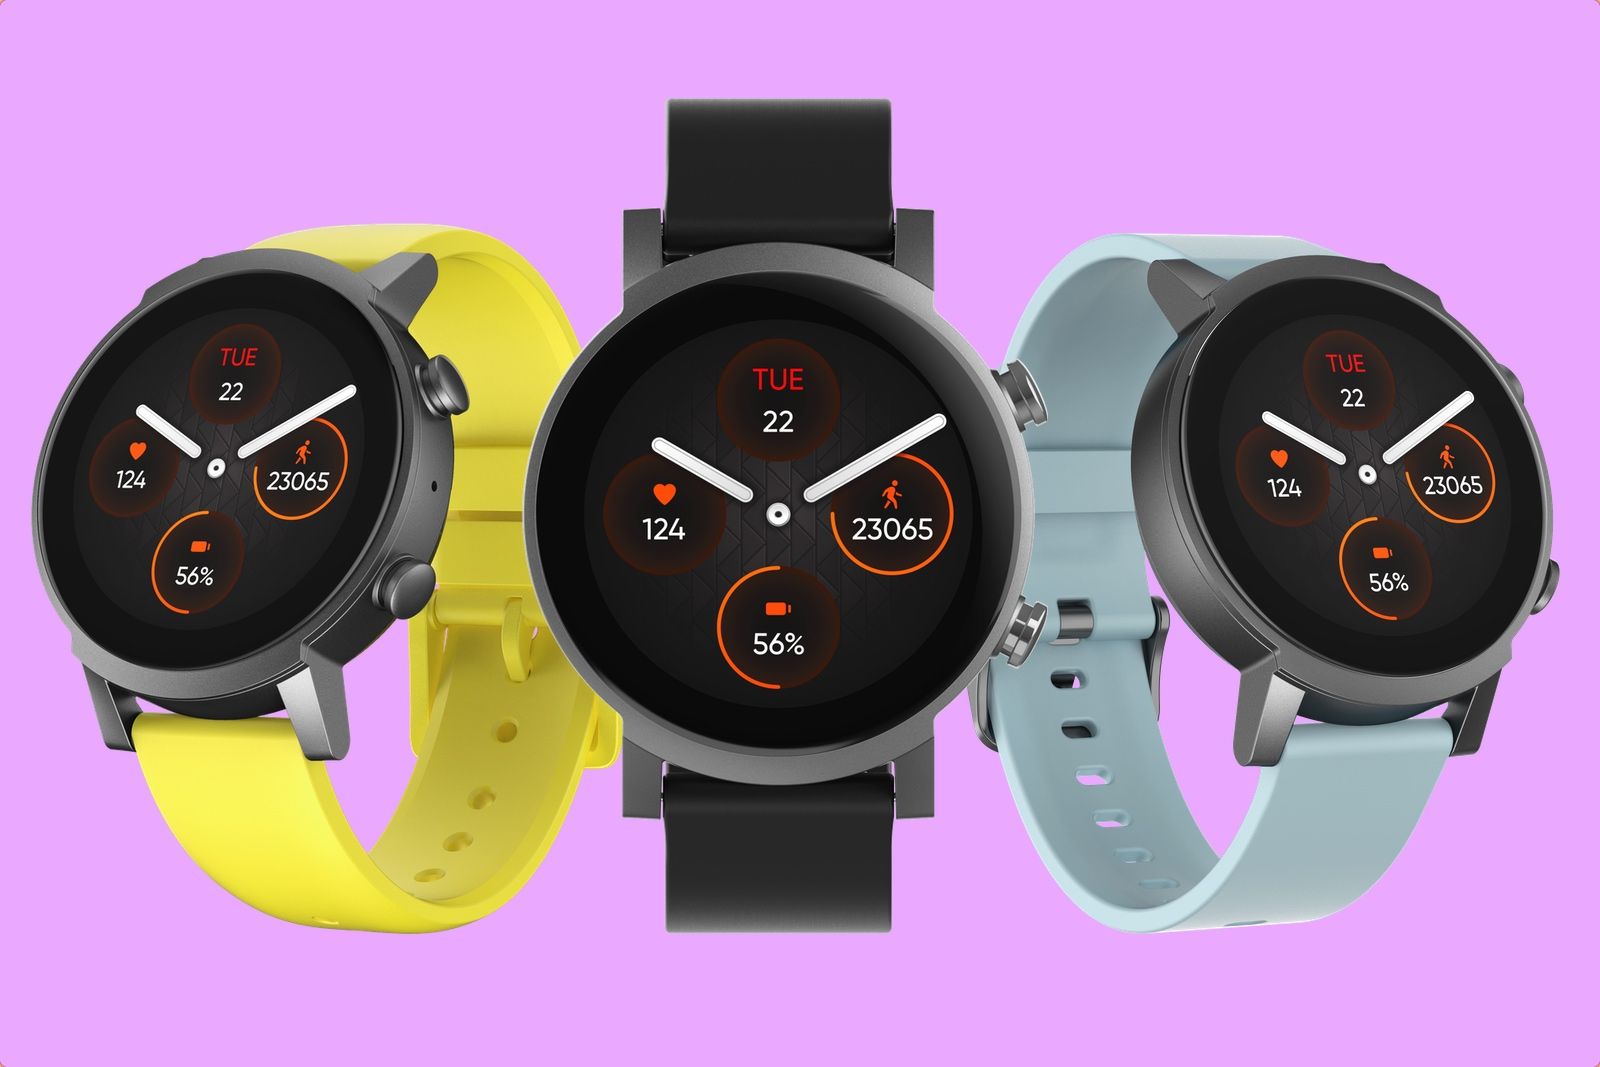 Mobvoi TicWatch E3 budget smartwatch launches with Snapdragon 4100 chip - but still no word on updated Wear OS photo 1